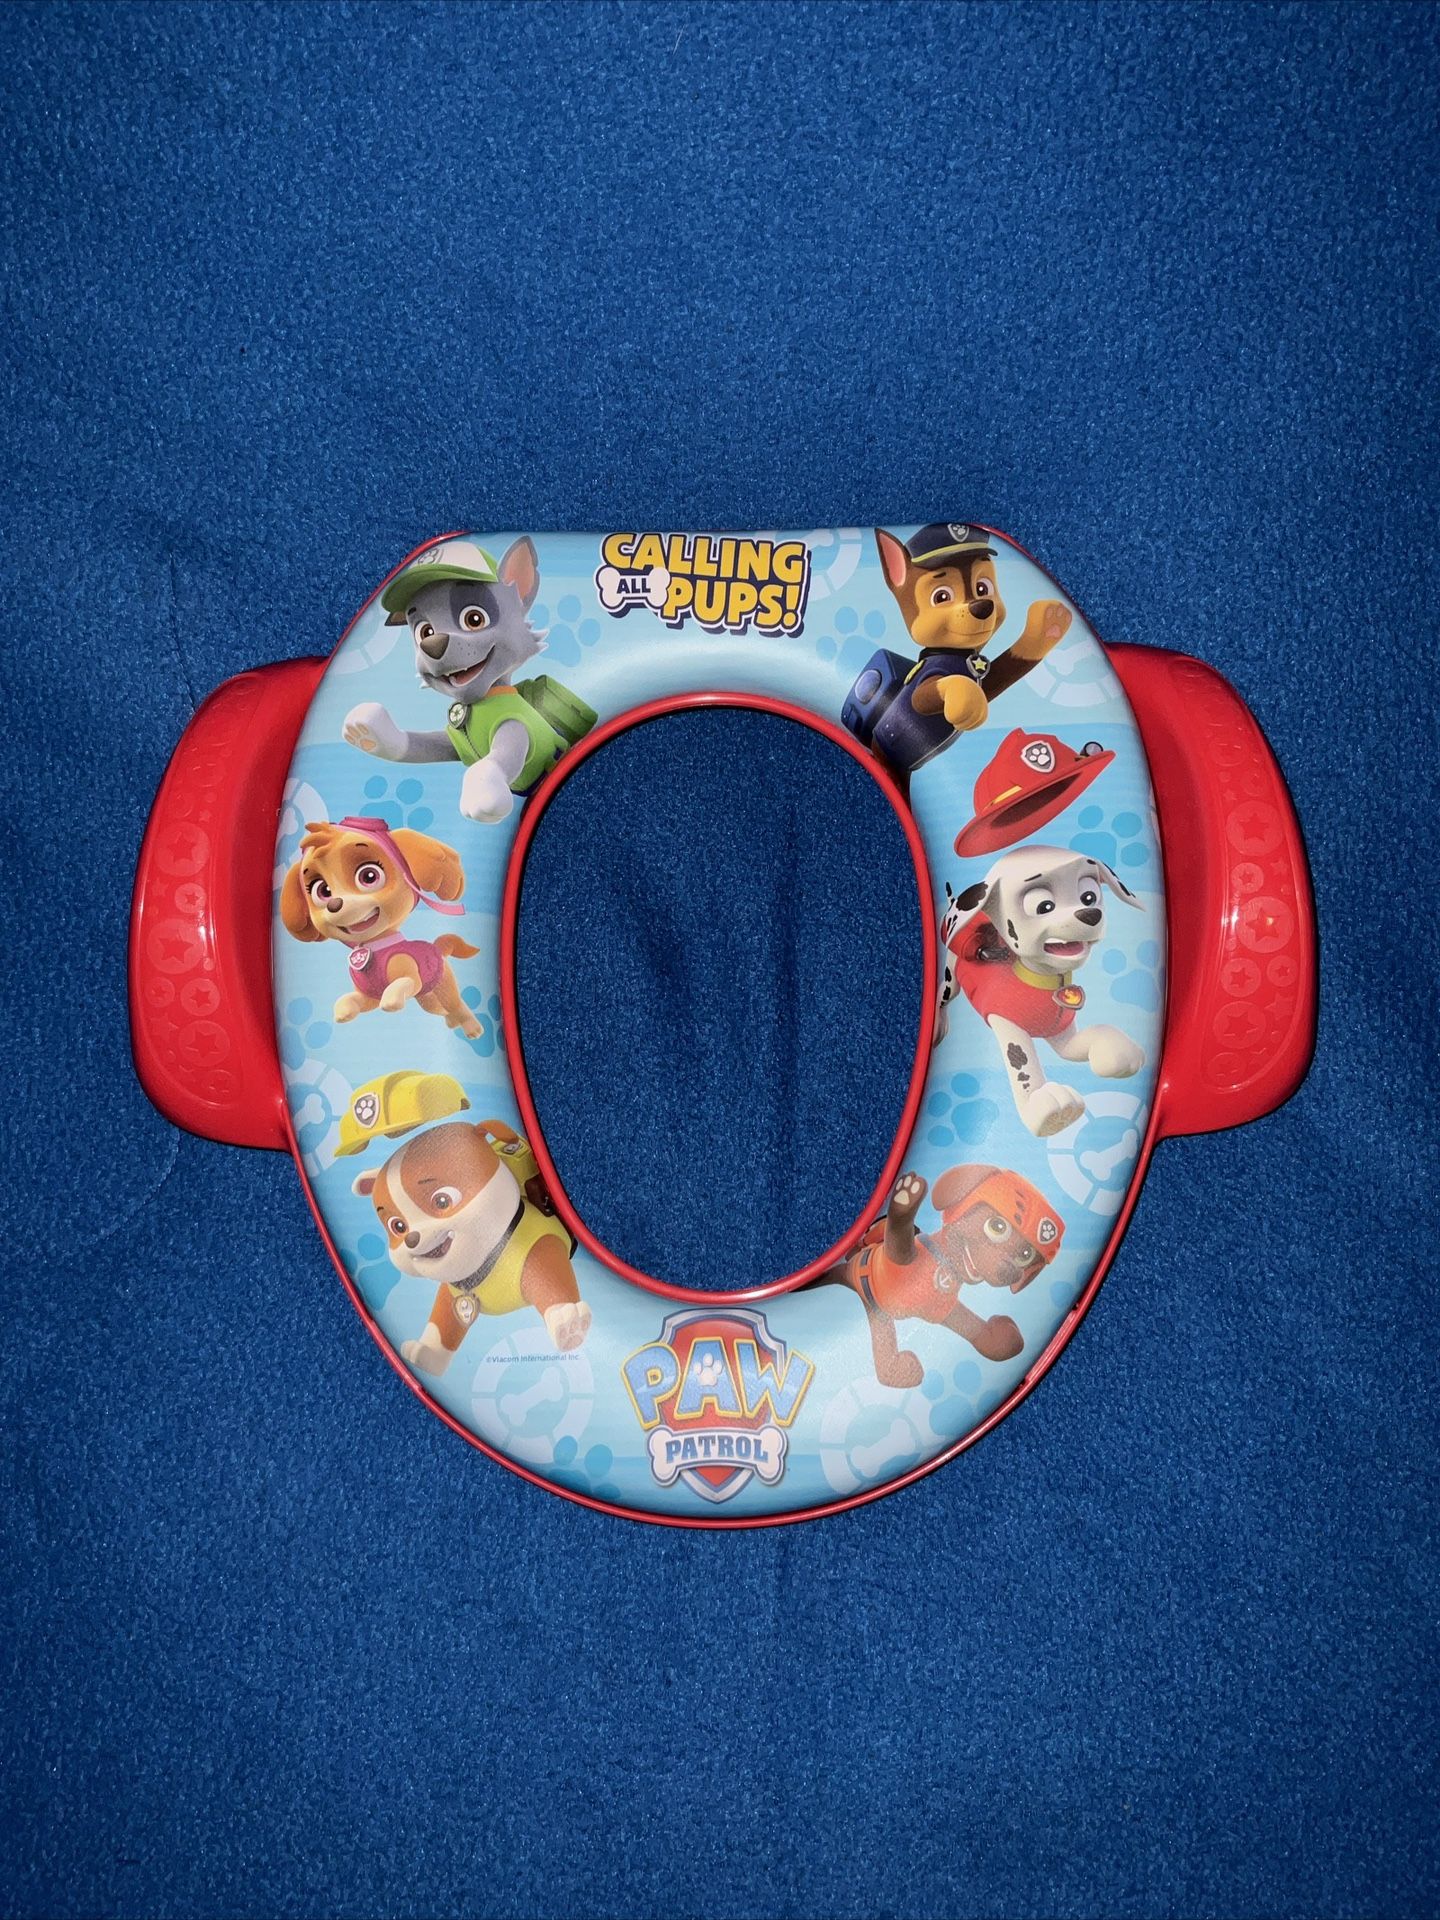 Nickelodeon PAW Patrol "Calling All Pups" Soft Potty Seat and Training Cushion